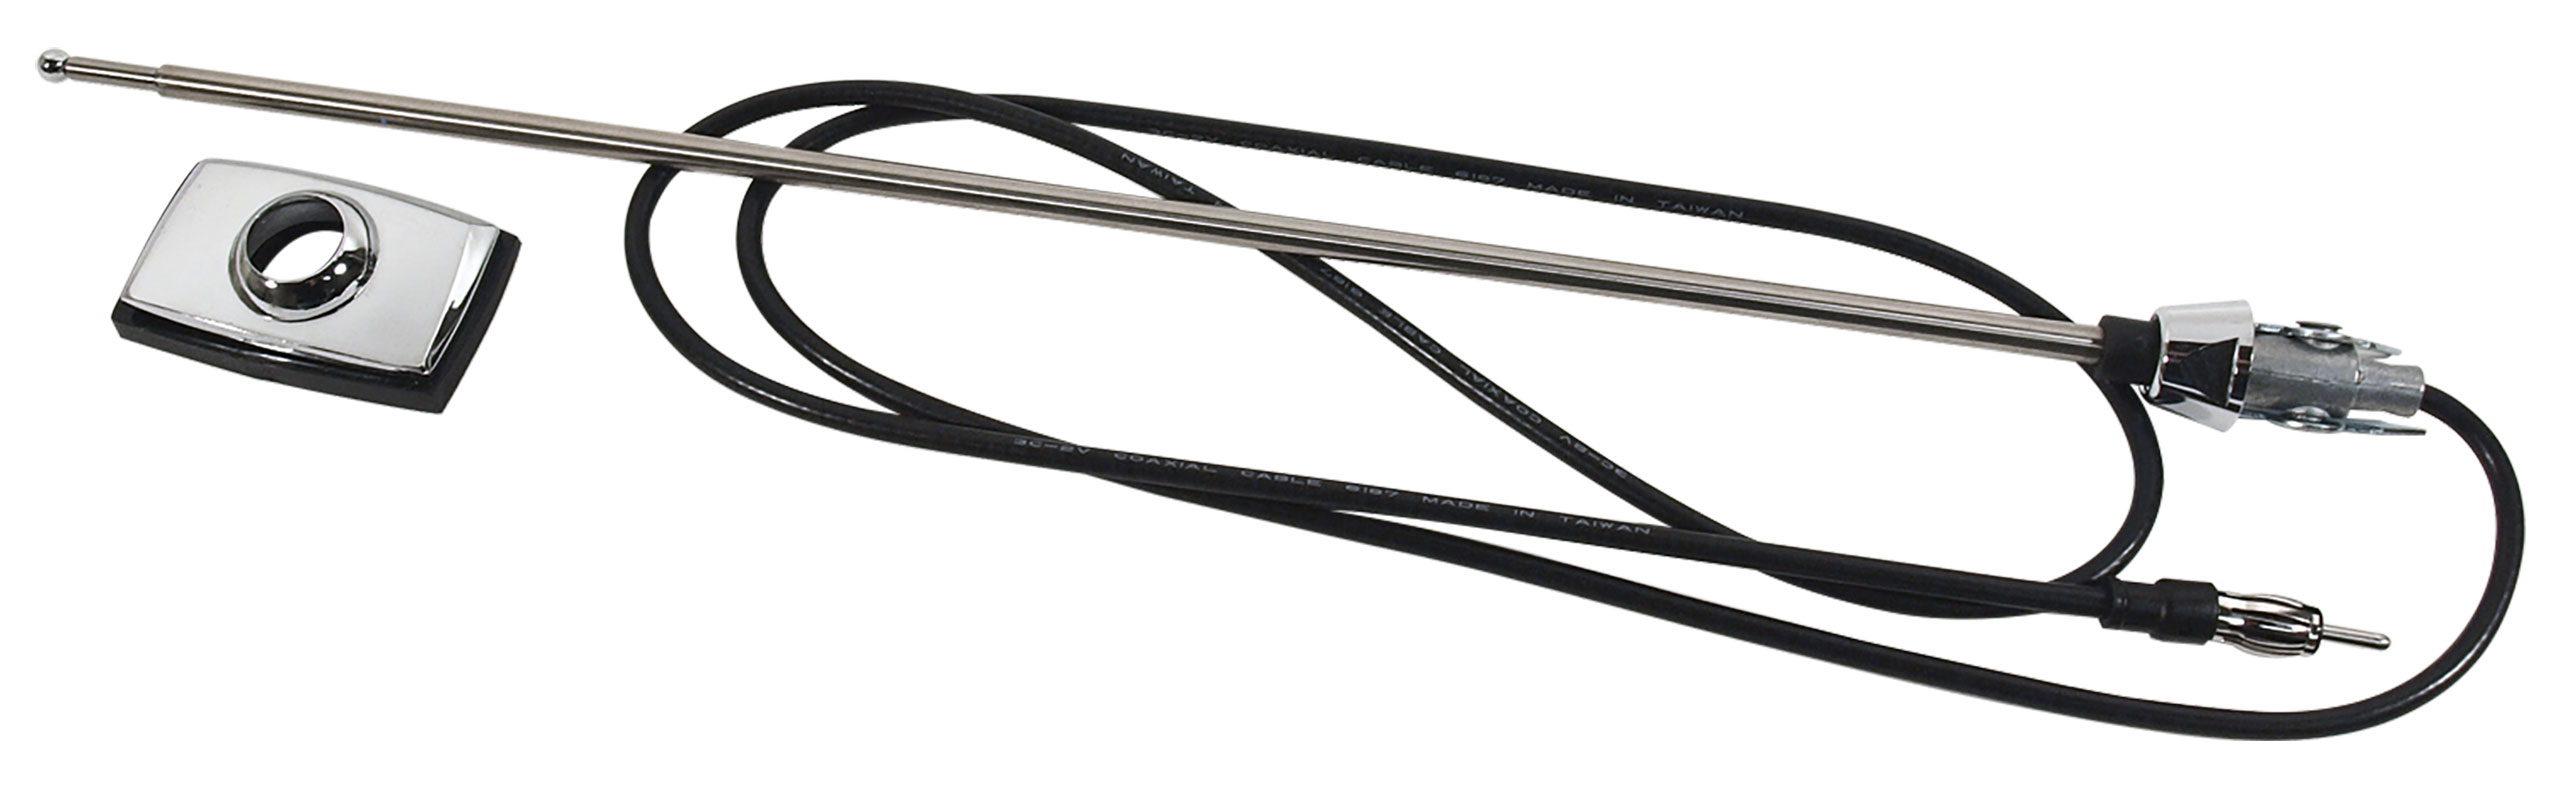 First Generation 1969-1973 Ford Mustang Antenna Assembly. - Auto Accessories of America